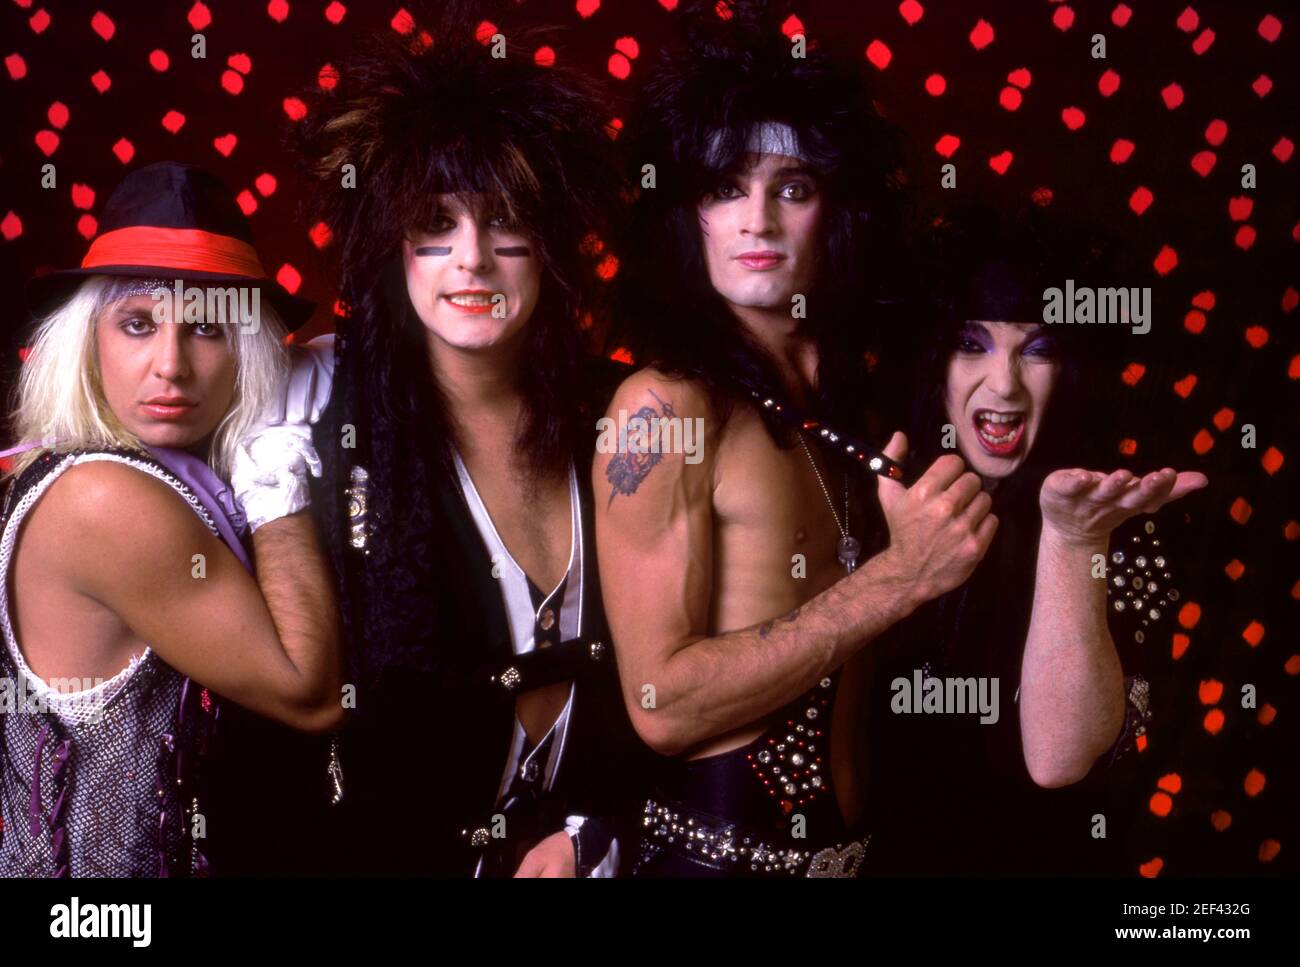 DETROIT, MI - SEPTEMBER 15: (L-R) Lead singer Vince Neil, bassist Nikki Sixx,  drummer Tommy Lee and lead guitarist Mick Mars of the American hard rock band  Motley Crue pose for a